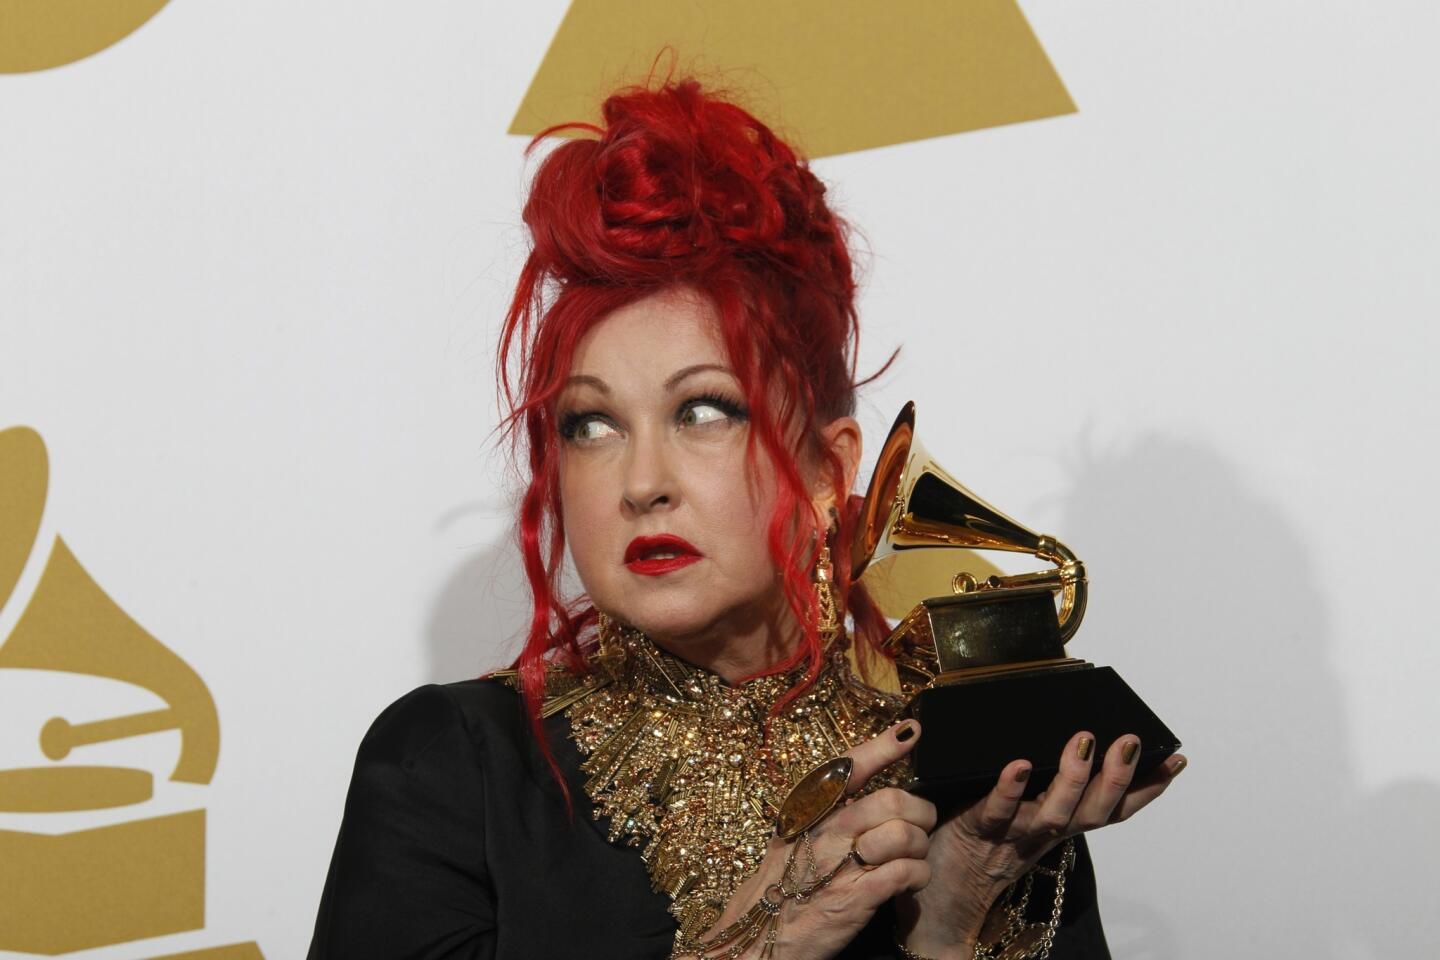 Cindy Lauper wins musical theater album, for "Kinky Boots."